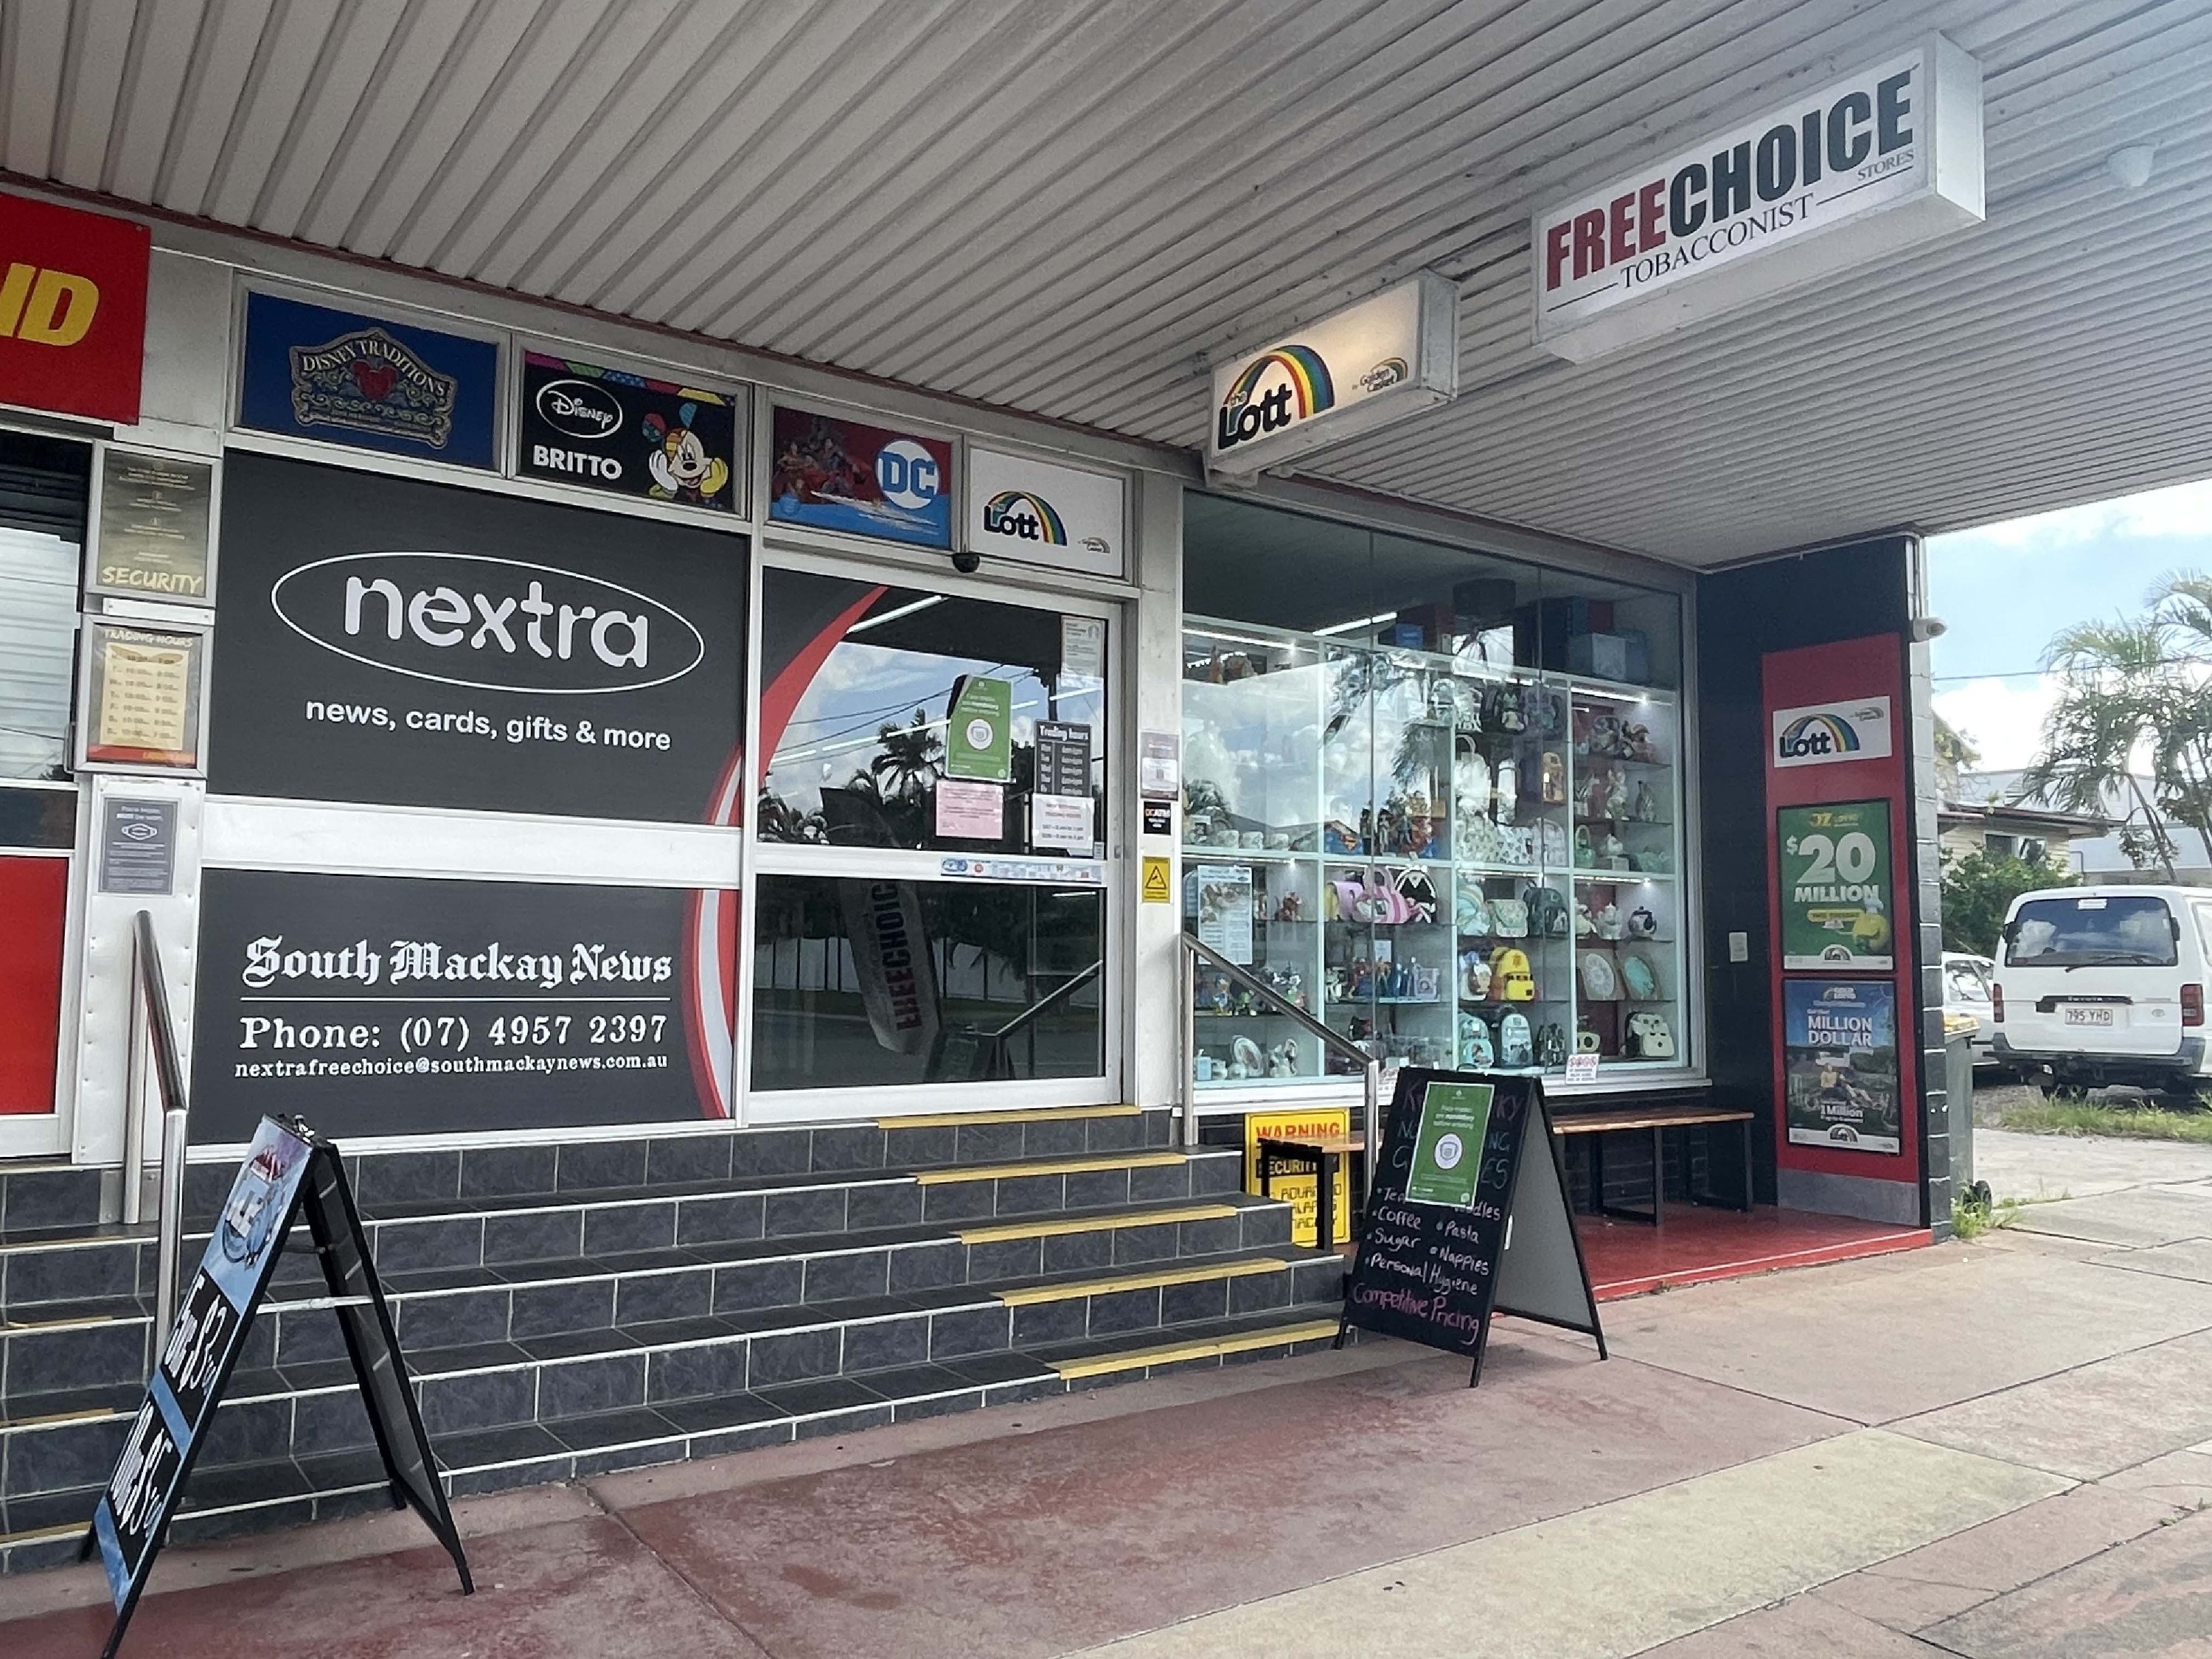 3 Businesses In One TOBACCONIST/NEWSAGENCY/ICE BUSINESS thumbnail 2